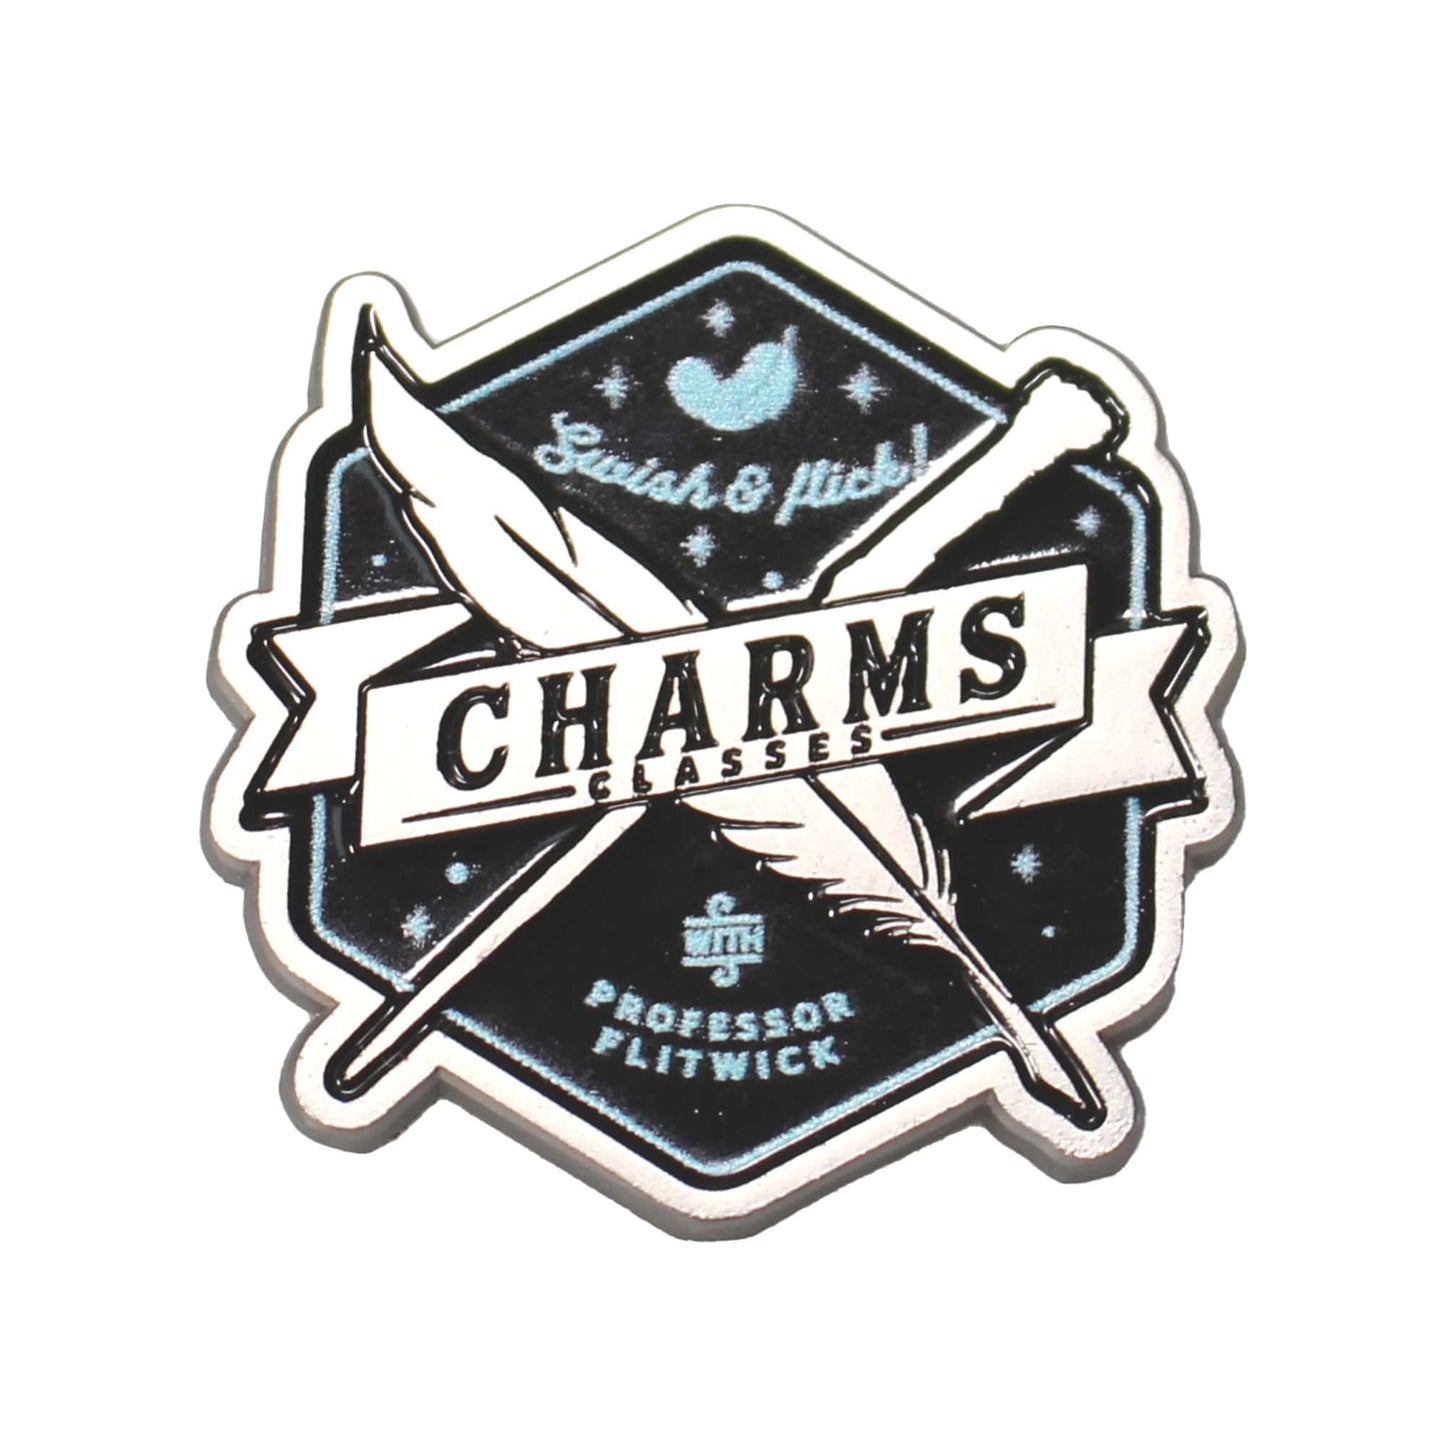 Charms Classes Pin Badge - Harry Potter Pin Badges